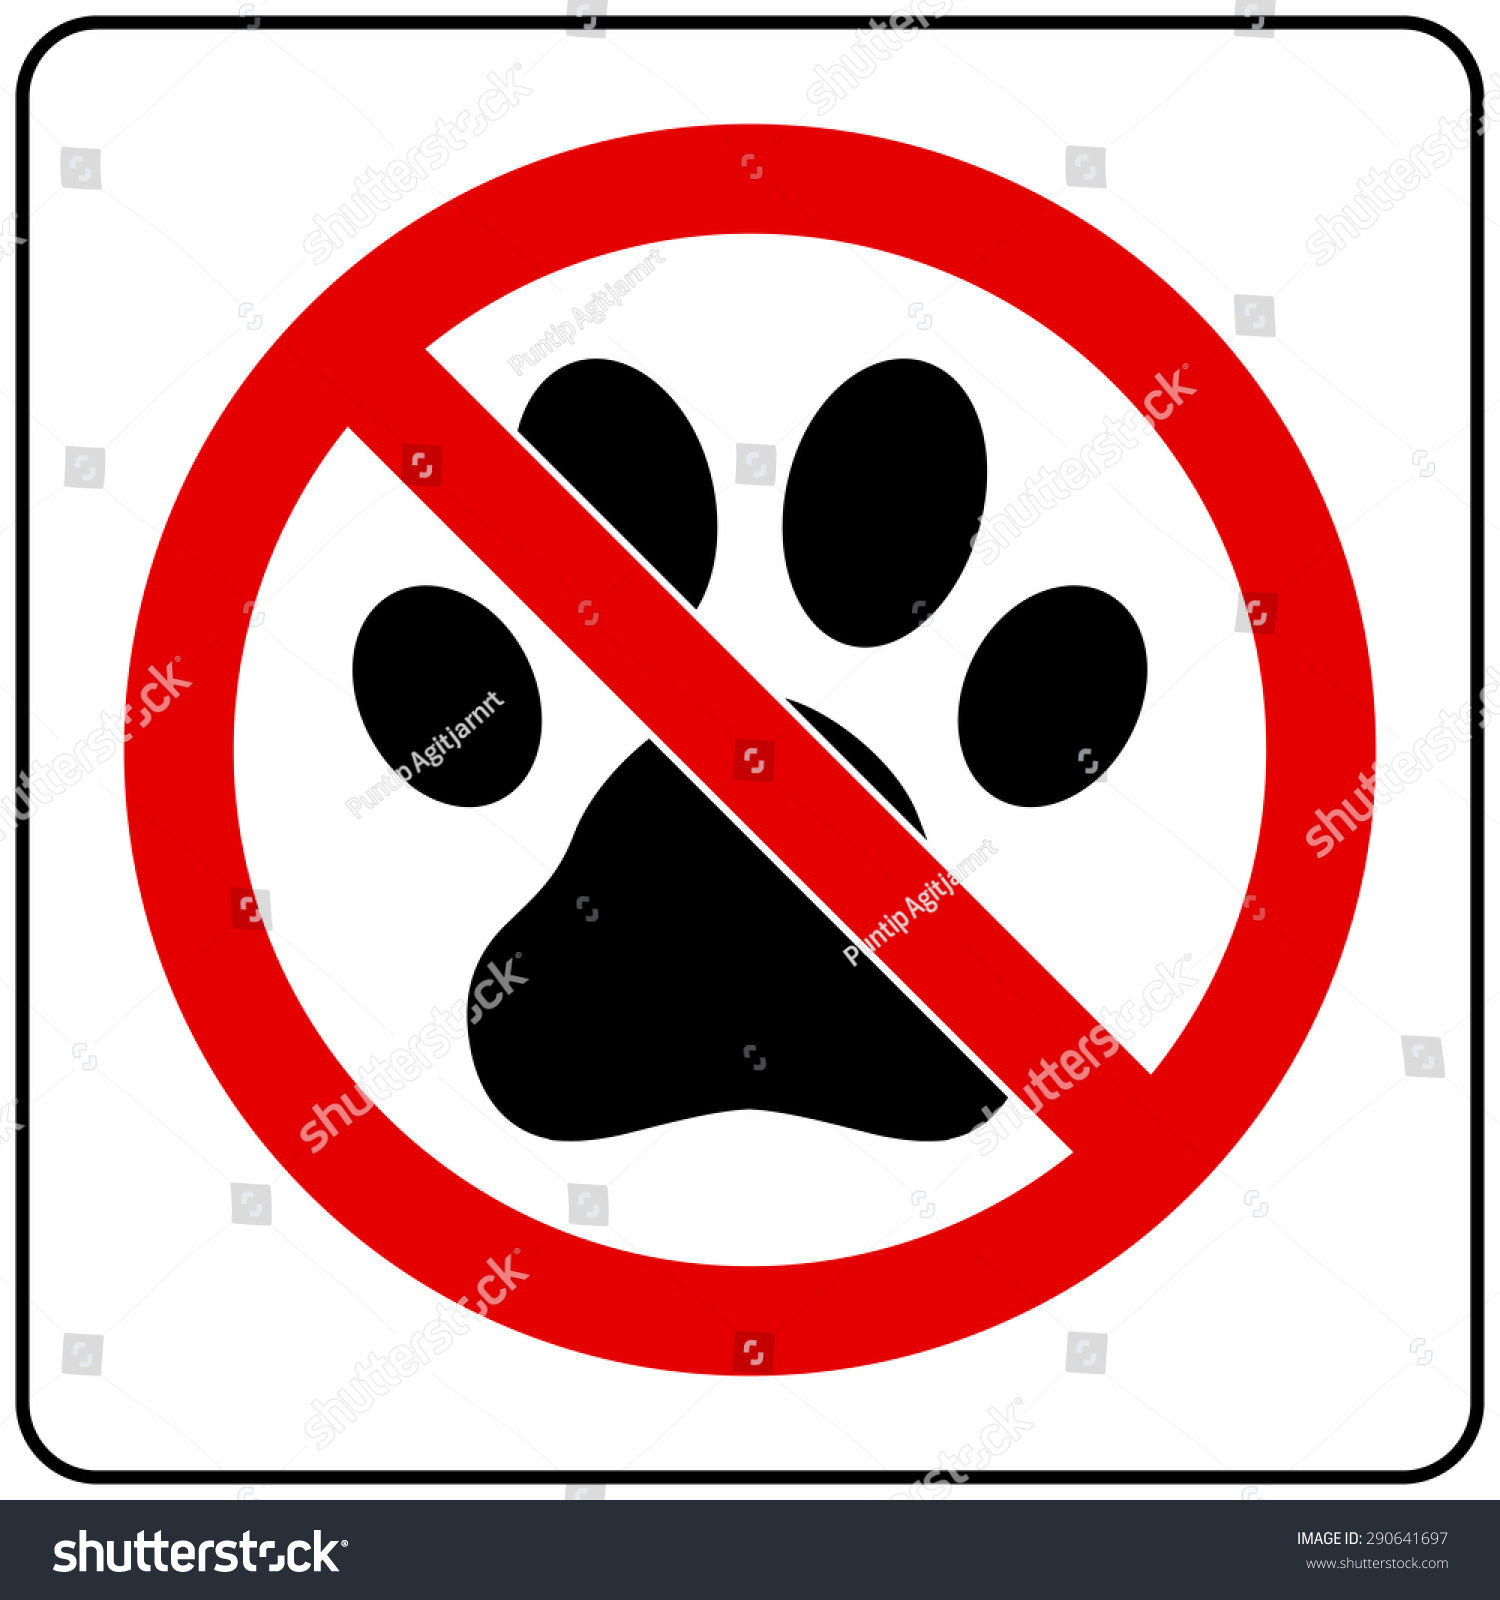 No Pets Allowed Sign Stock Vector (Royalty Free) 290641697 - Shutterstock